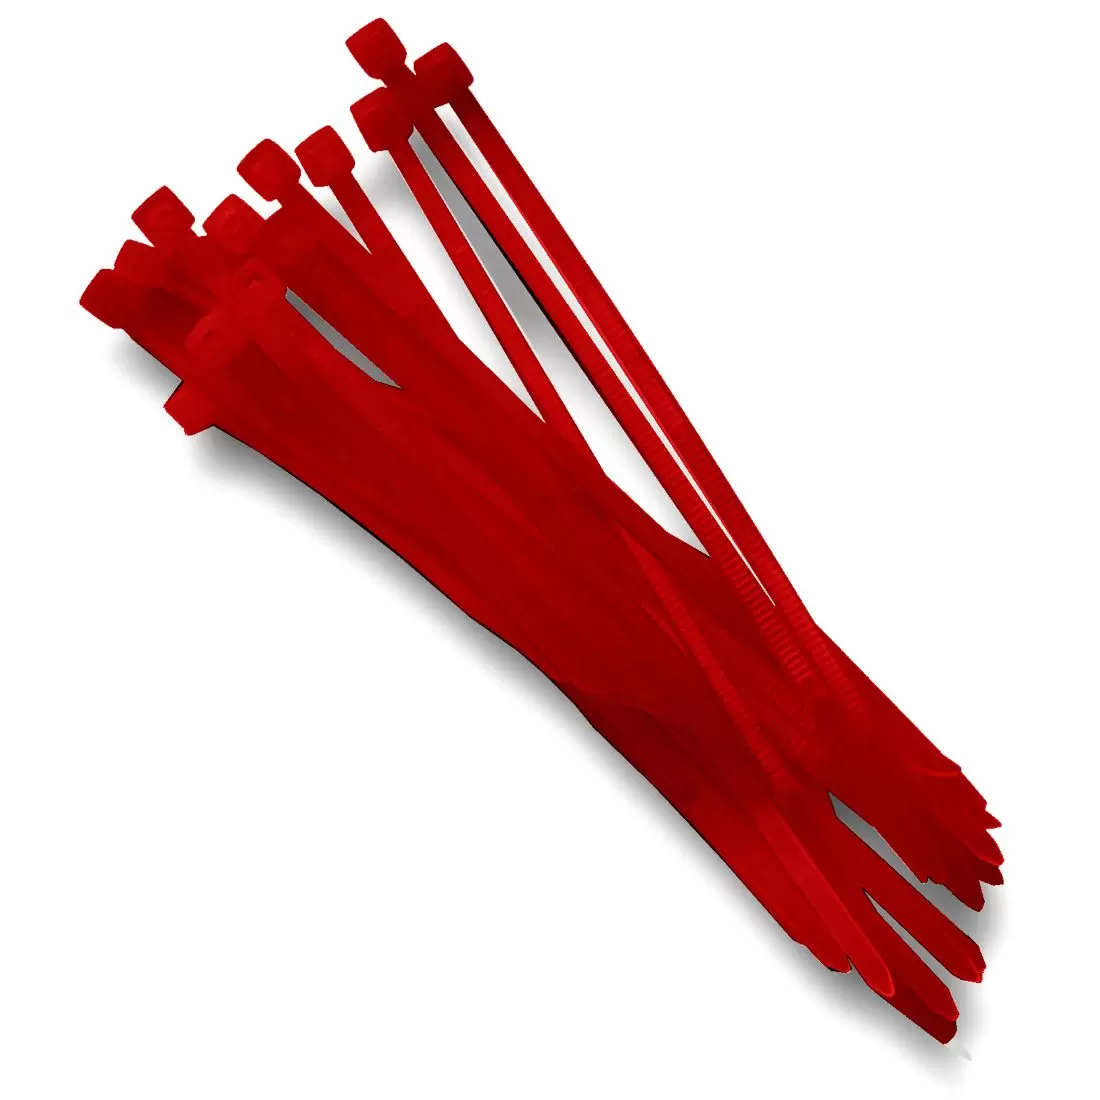 Bionic Trimmer Cable Ties (24 Pack)